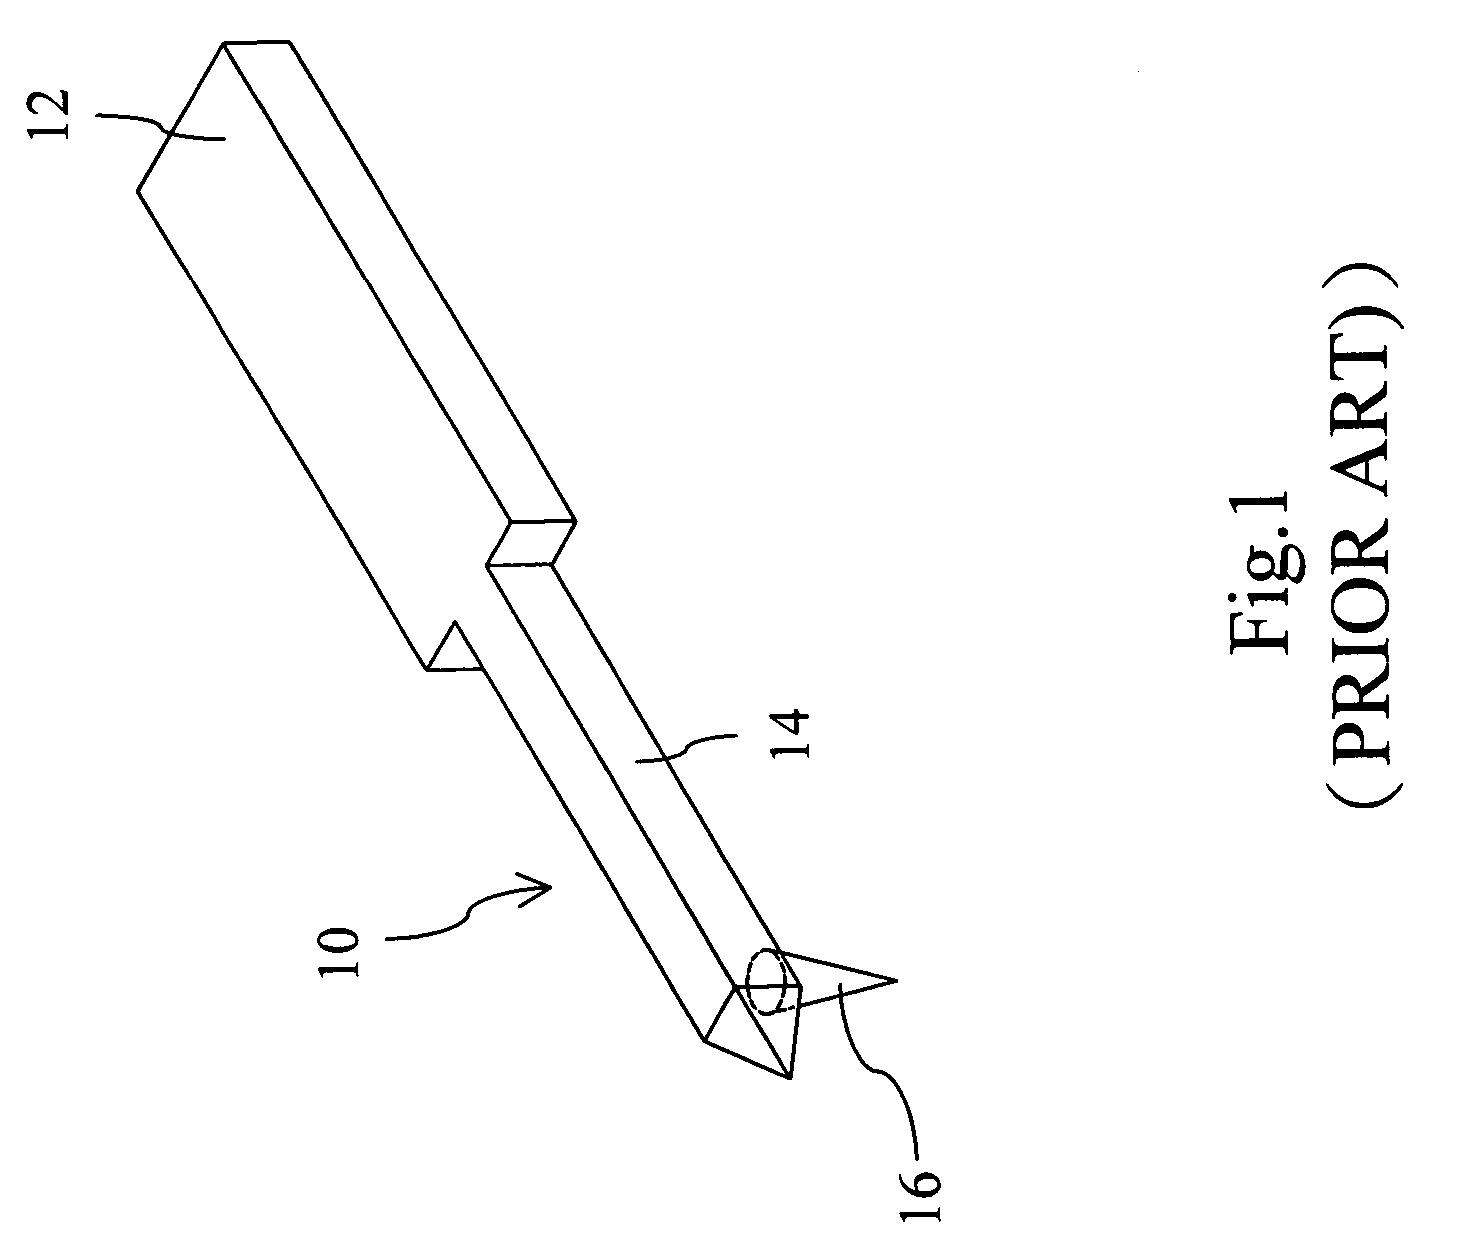 Front-wing cantilever for the conductive probe of electrical scanning probe microscopes